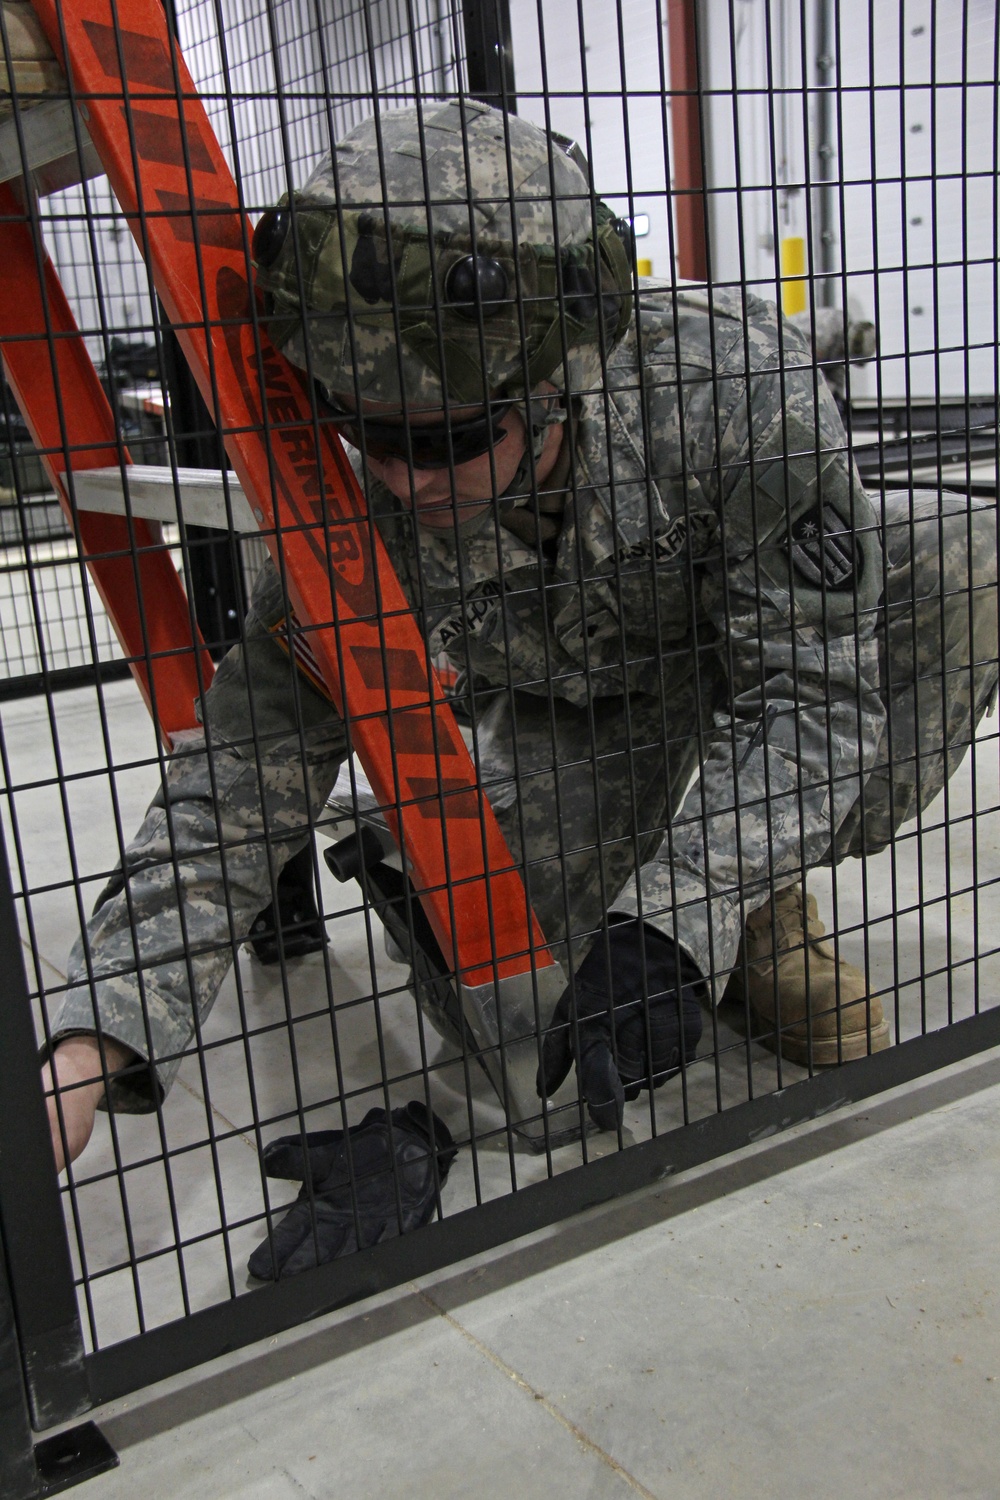 492nd Engineer Company completes detainee holding area construction